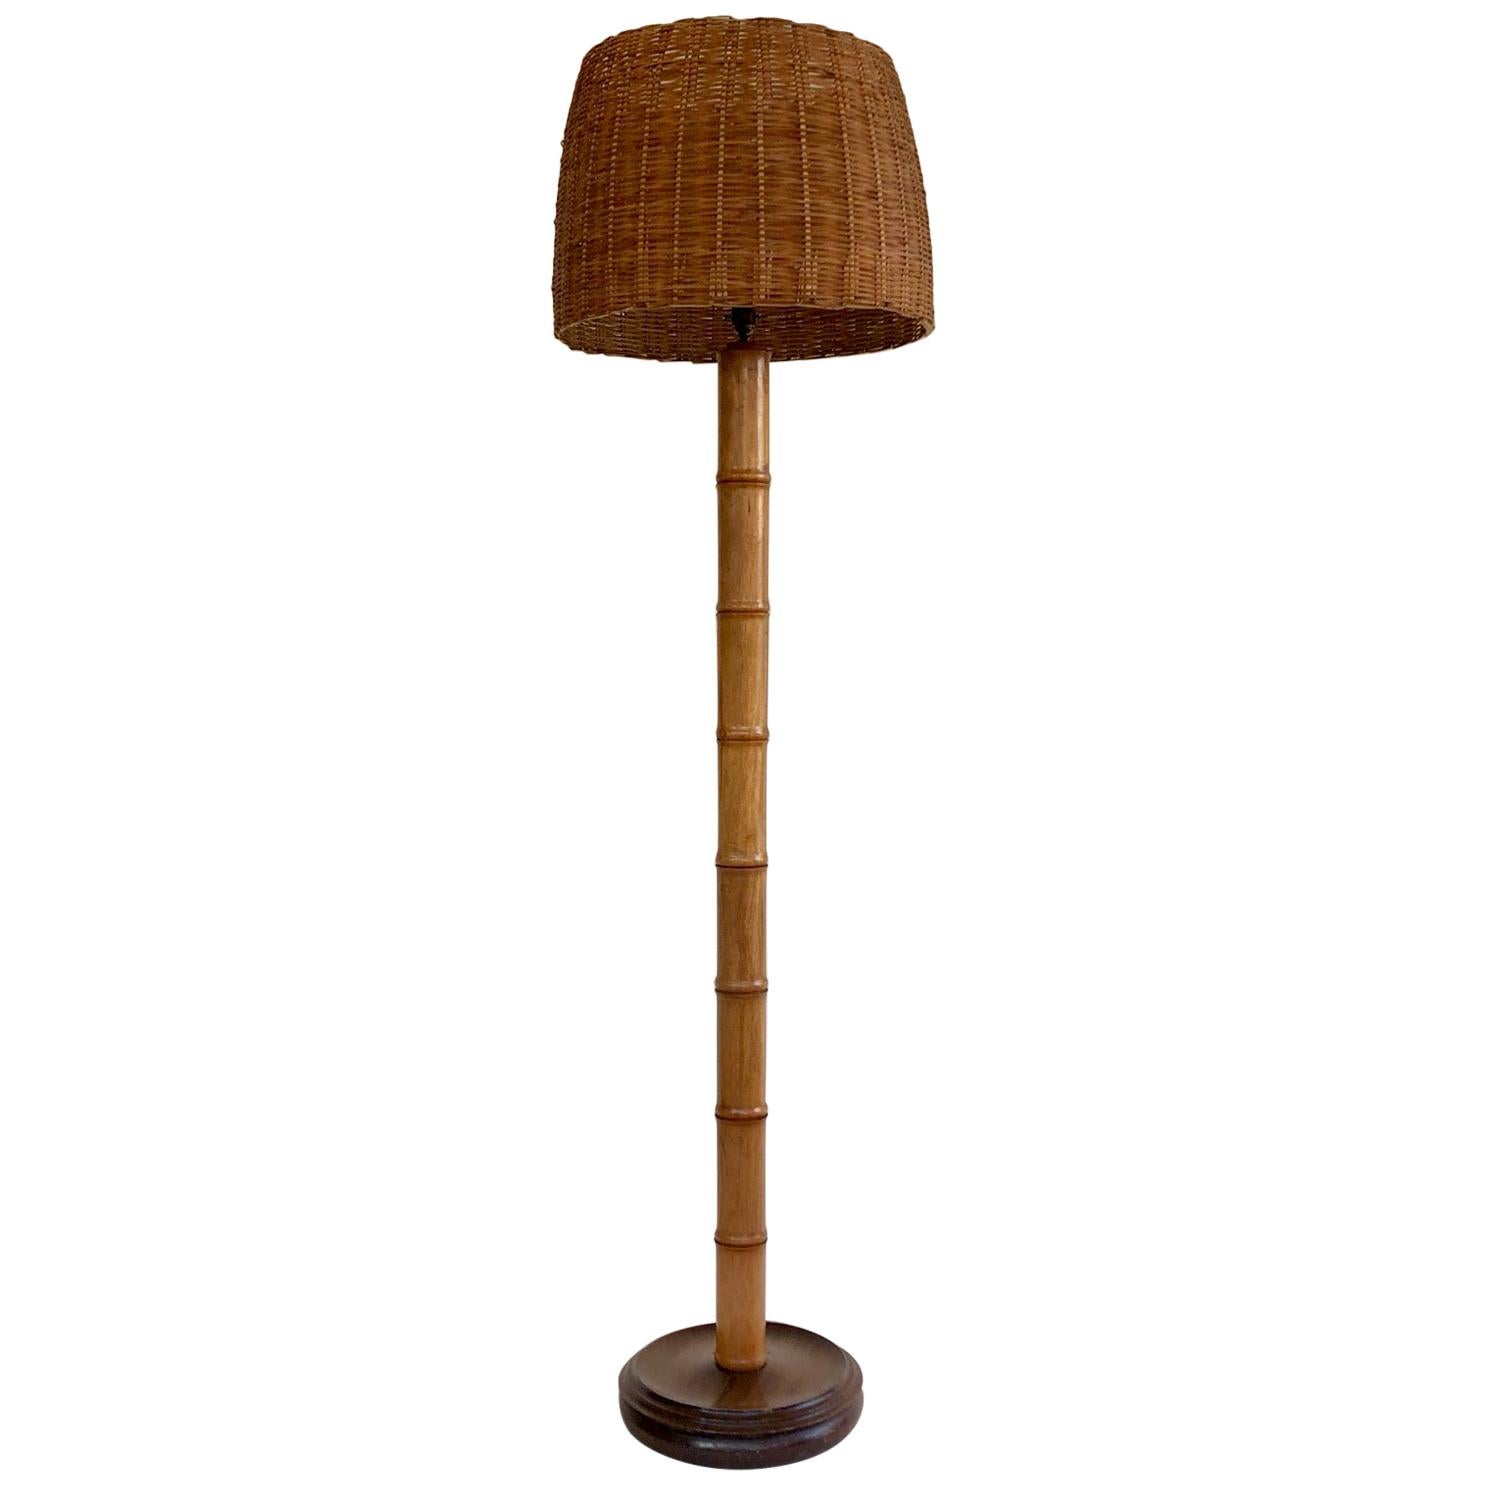 French Wicker Rattan and fake Bamboo Wooden Floor Lamp Lampadaire, circa 1950s